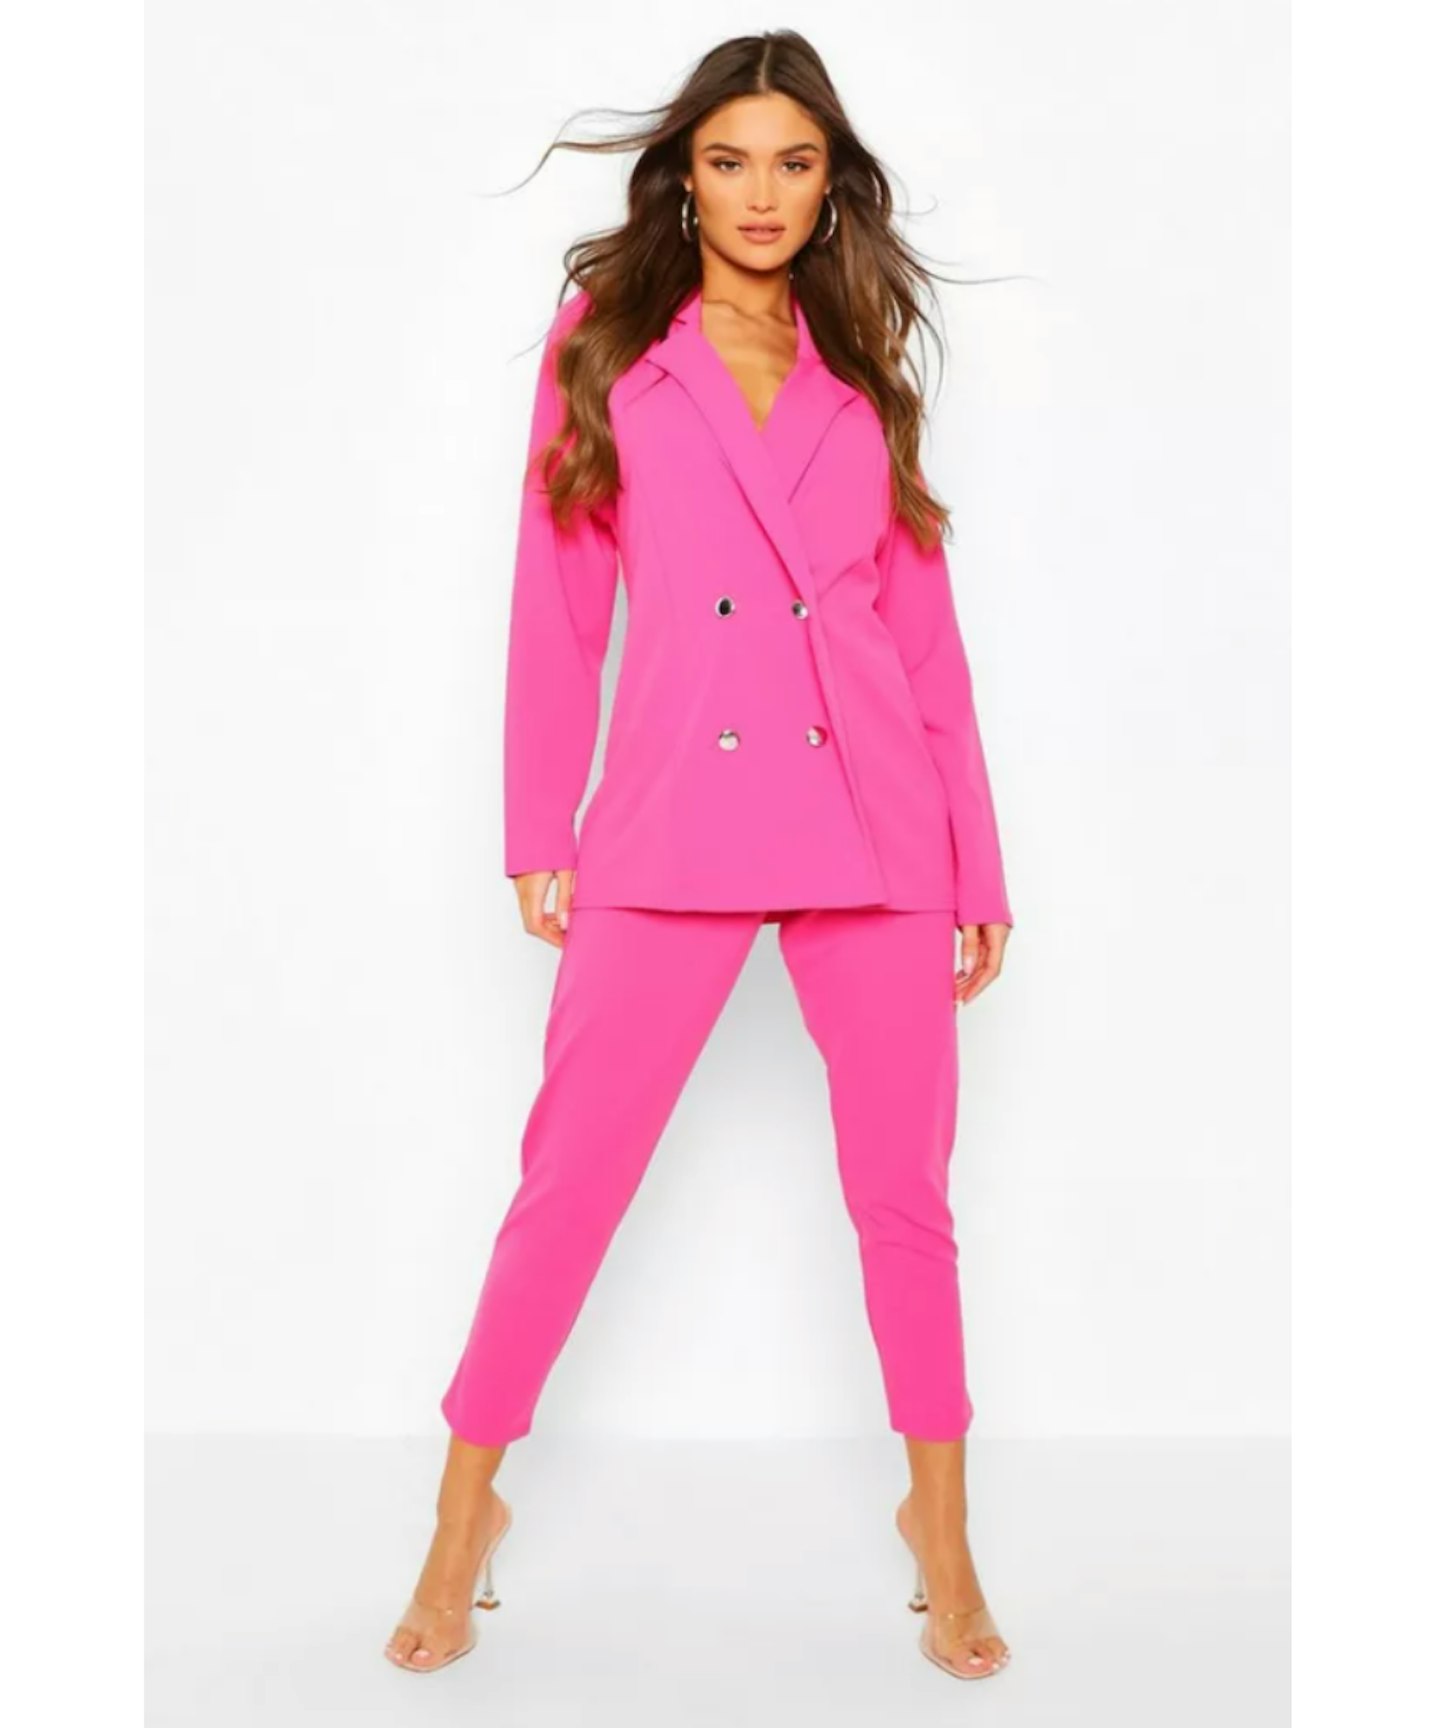 Double Breasted Blazer and Trouser Suit Set